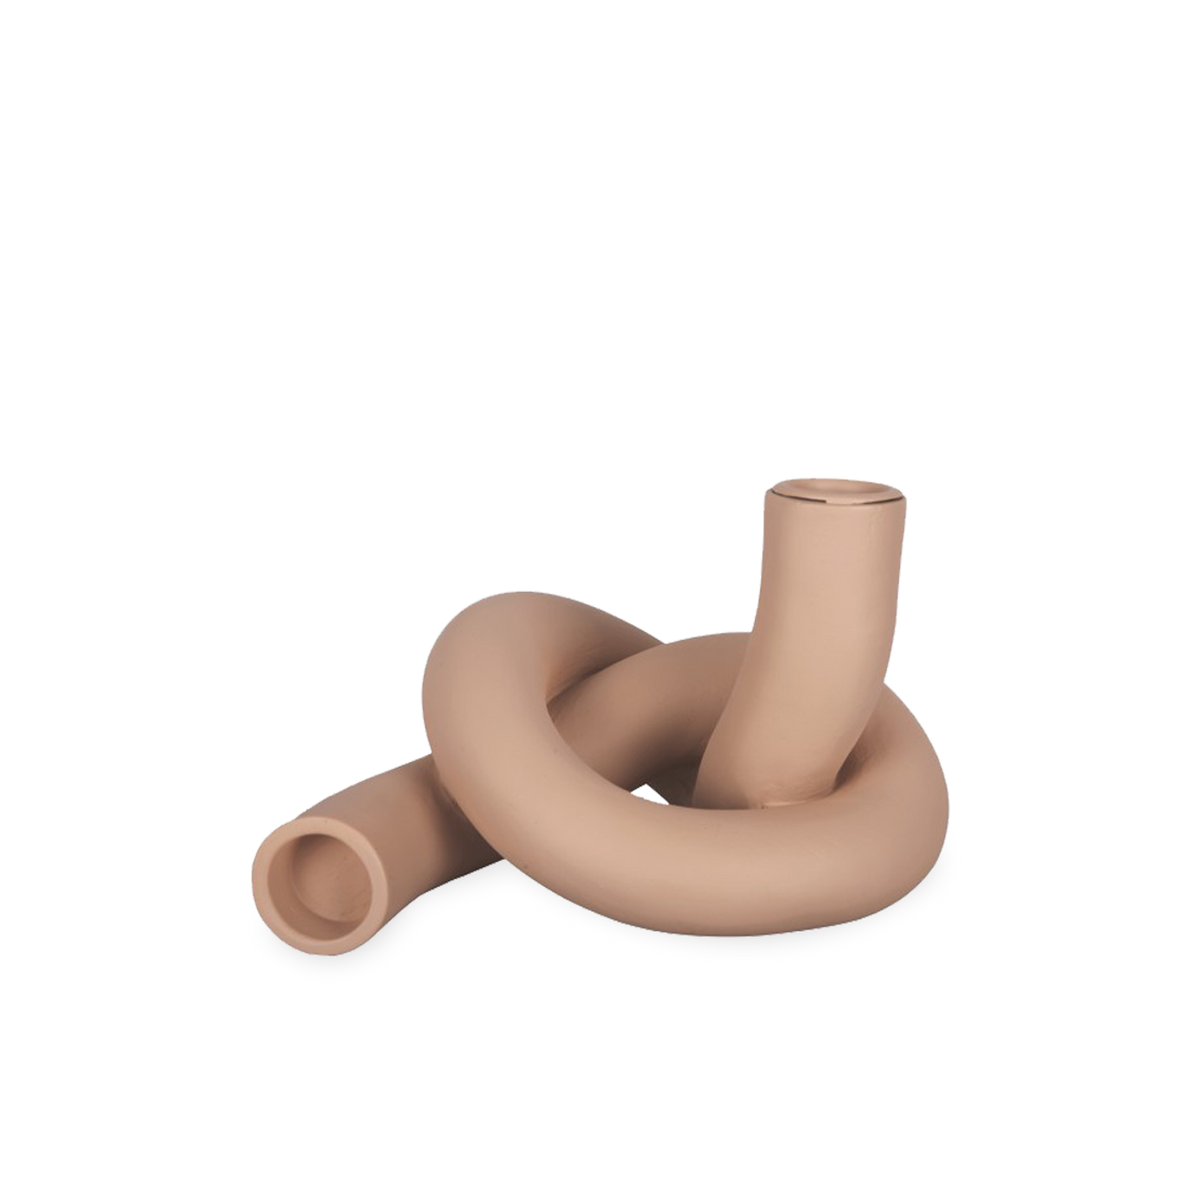 Defined by its sculptural silhouette, the Knot Candleholder features a knot-shaped ceramic design.